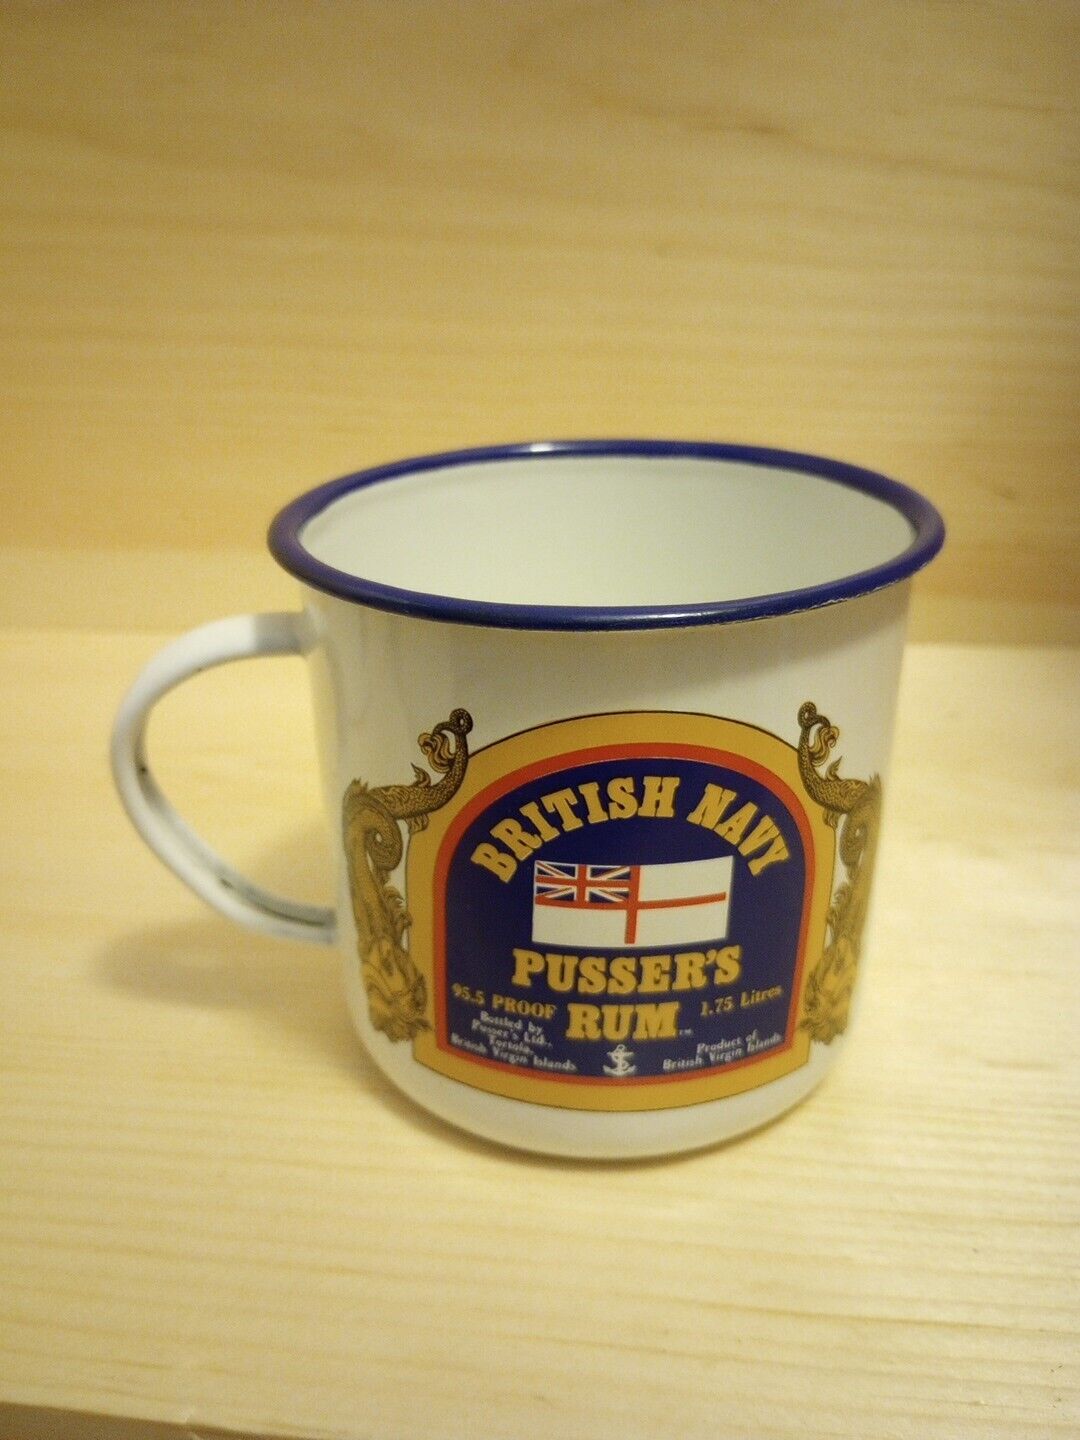 PUSSER\'S RUM British Navy Enamel Tin Mug Cup Royal Navy Traditional Toasts Terms